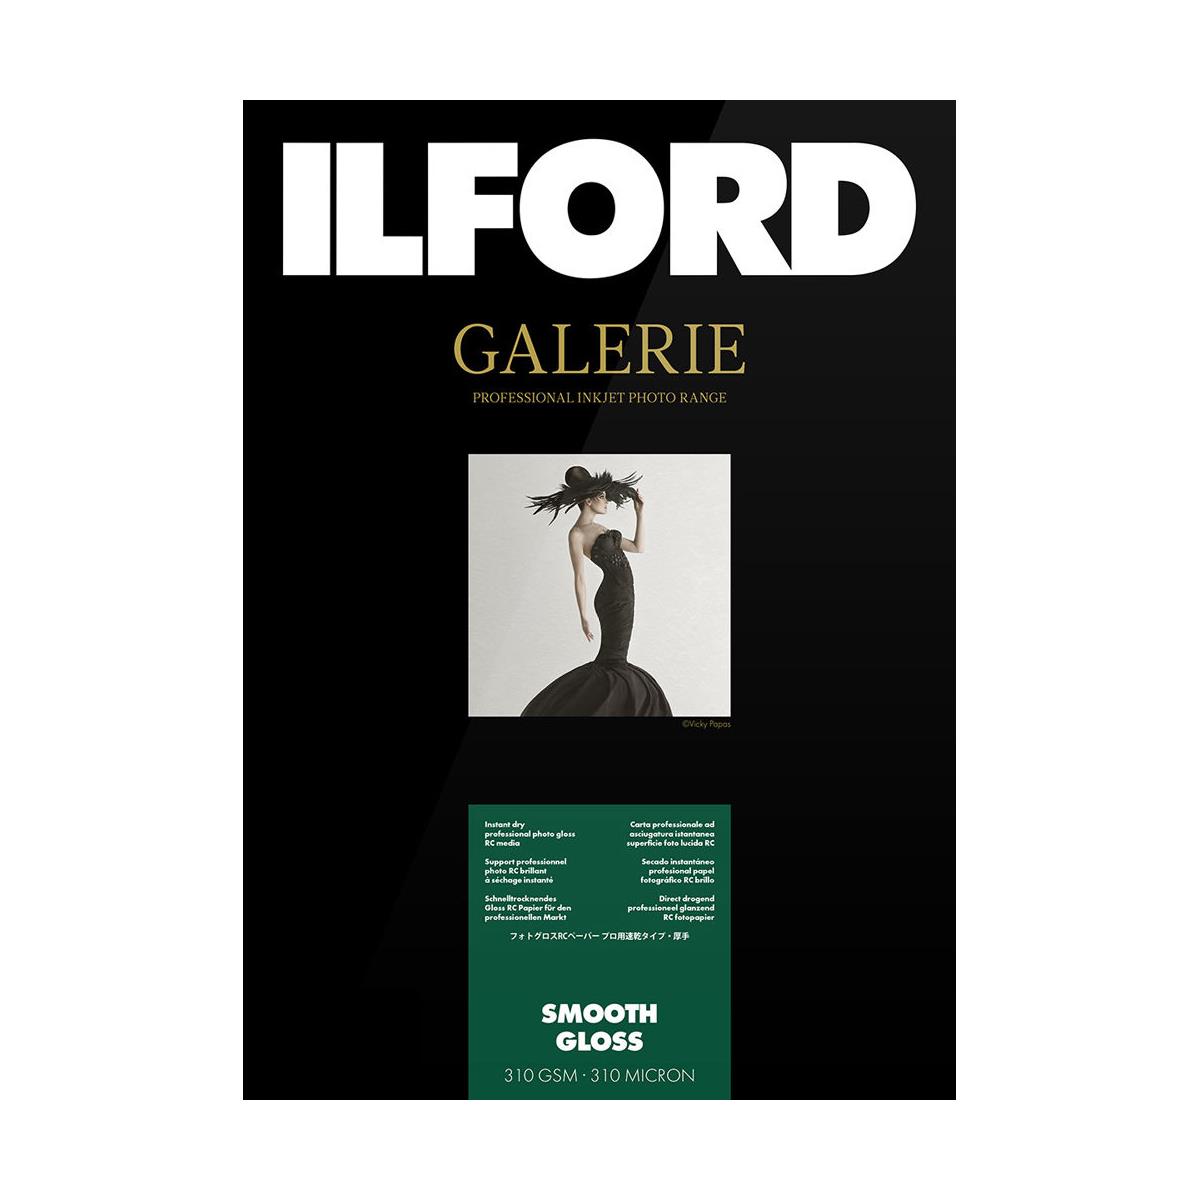 Photos - Office Paper Ilford GALERIE Prestige Smooth Gloss Inkjet Paper,310 gsm,8.5x11",30 Sheet 